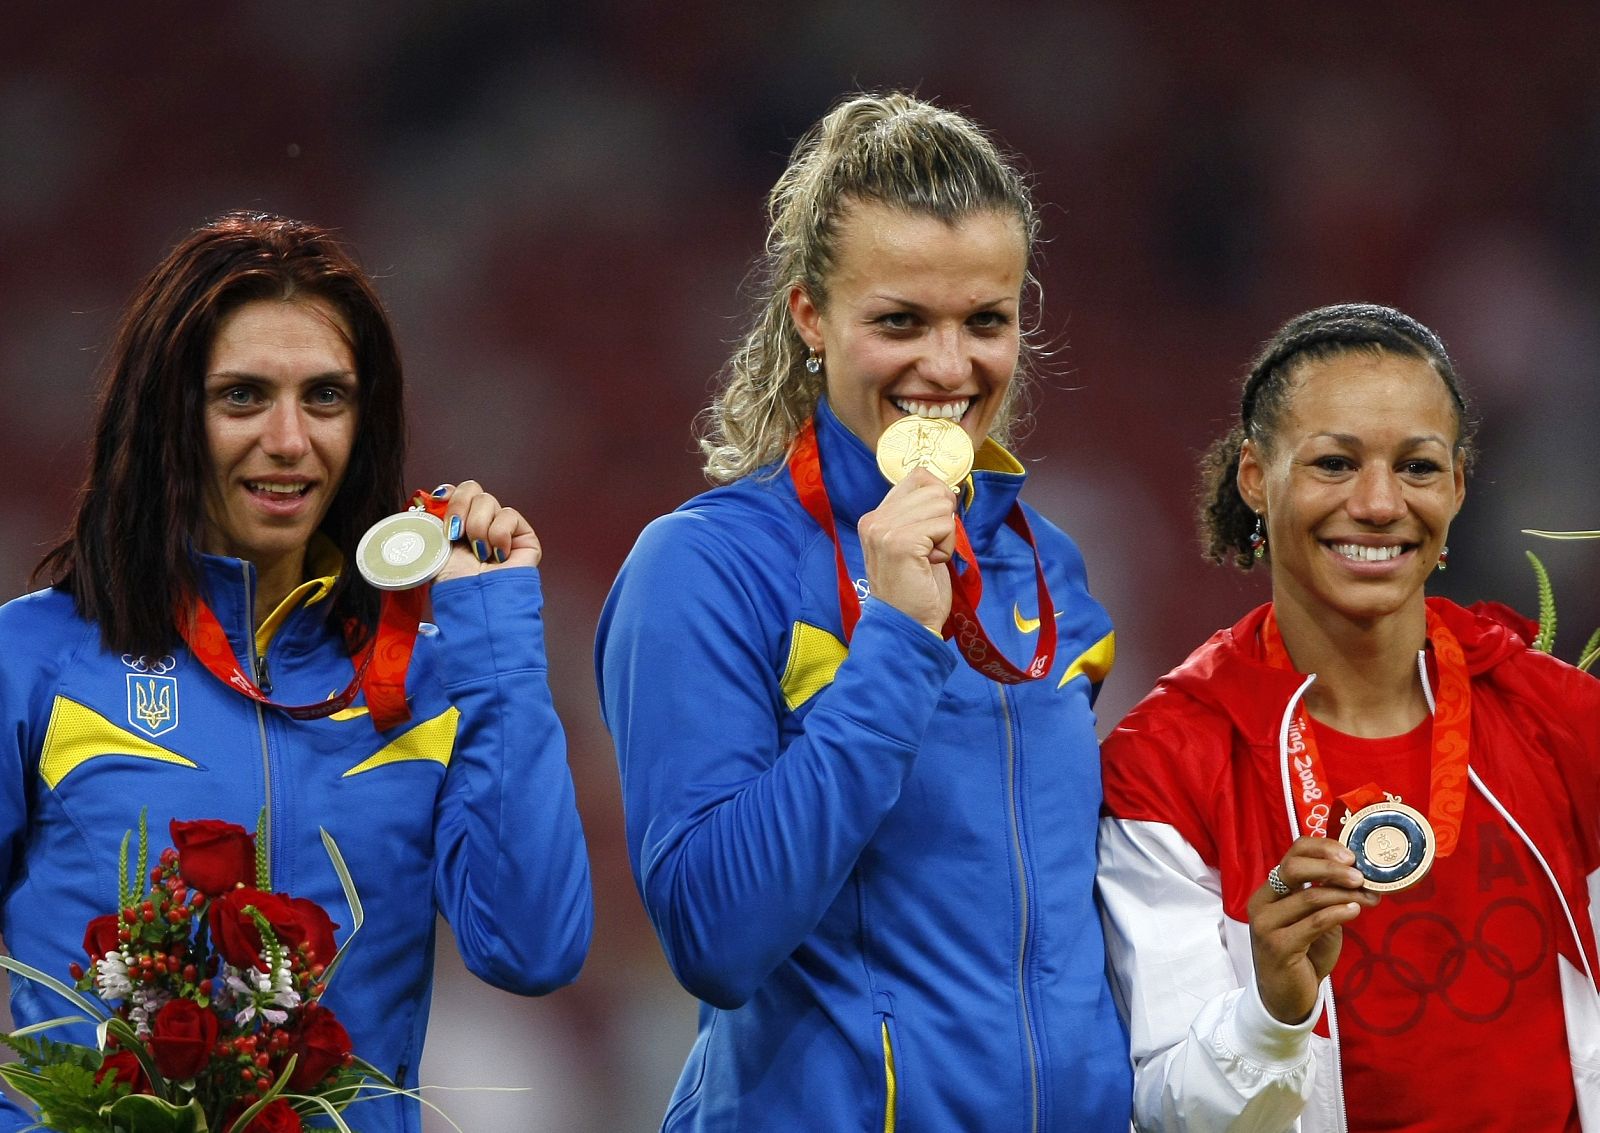 Silver medallist Blonska of Ukraine, gold medallist Dobrynska of Ukraine pose with bronze medallist Fountain of the U.S. after competing in the women's heptathlon in the athletics competition in the National Stadium at the Beijing 2008 Olympic Games